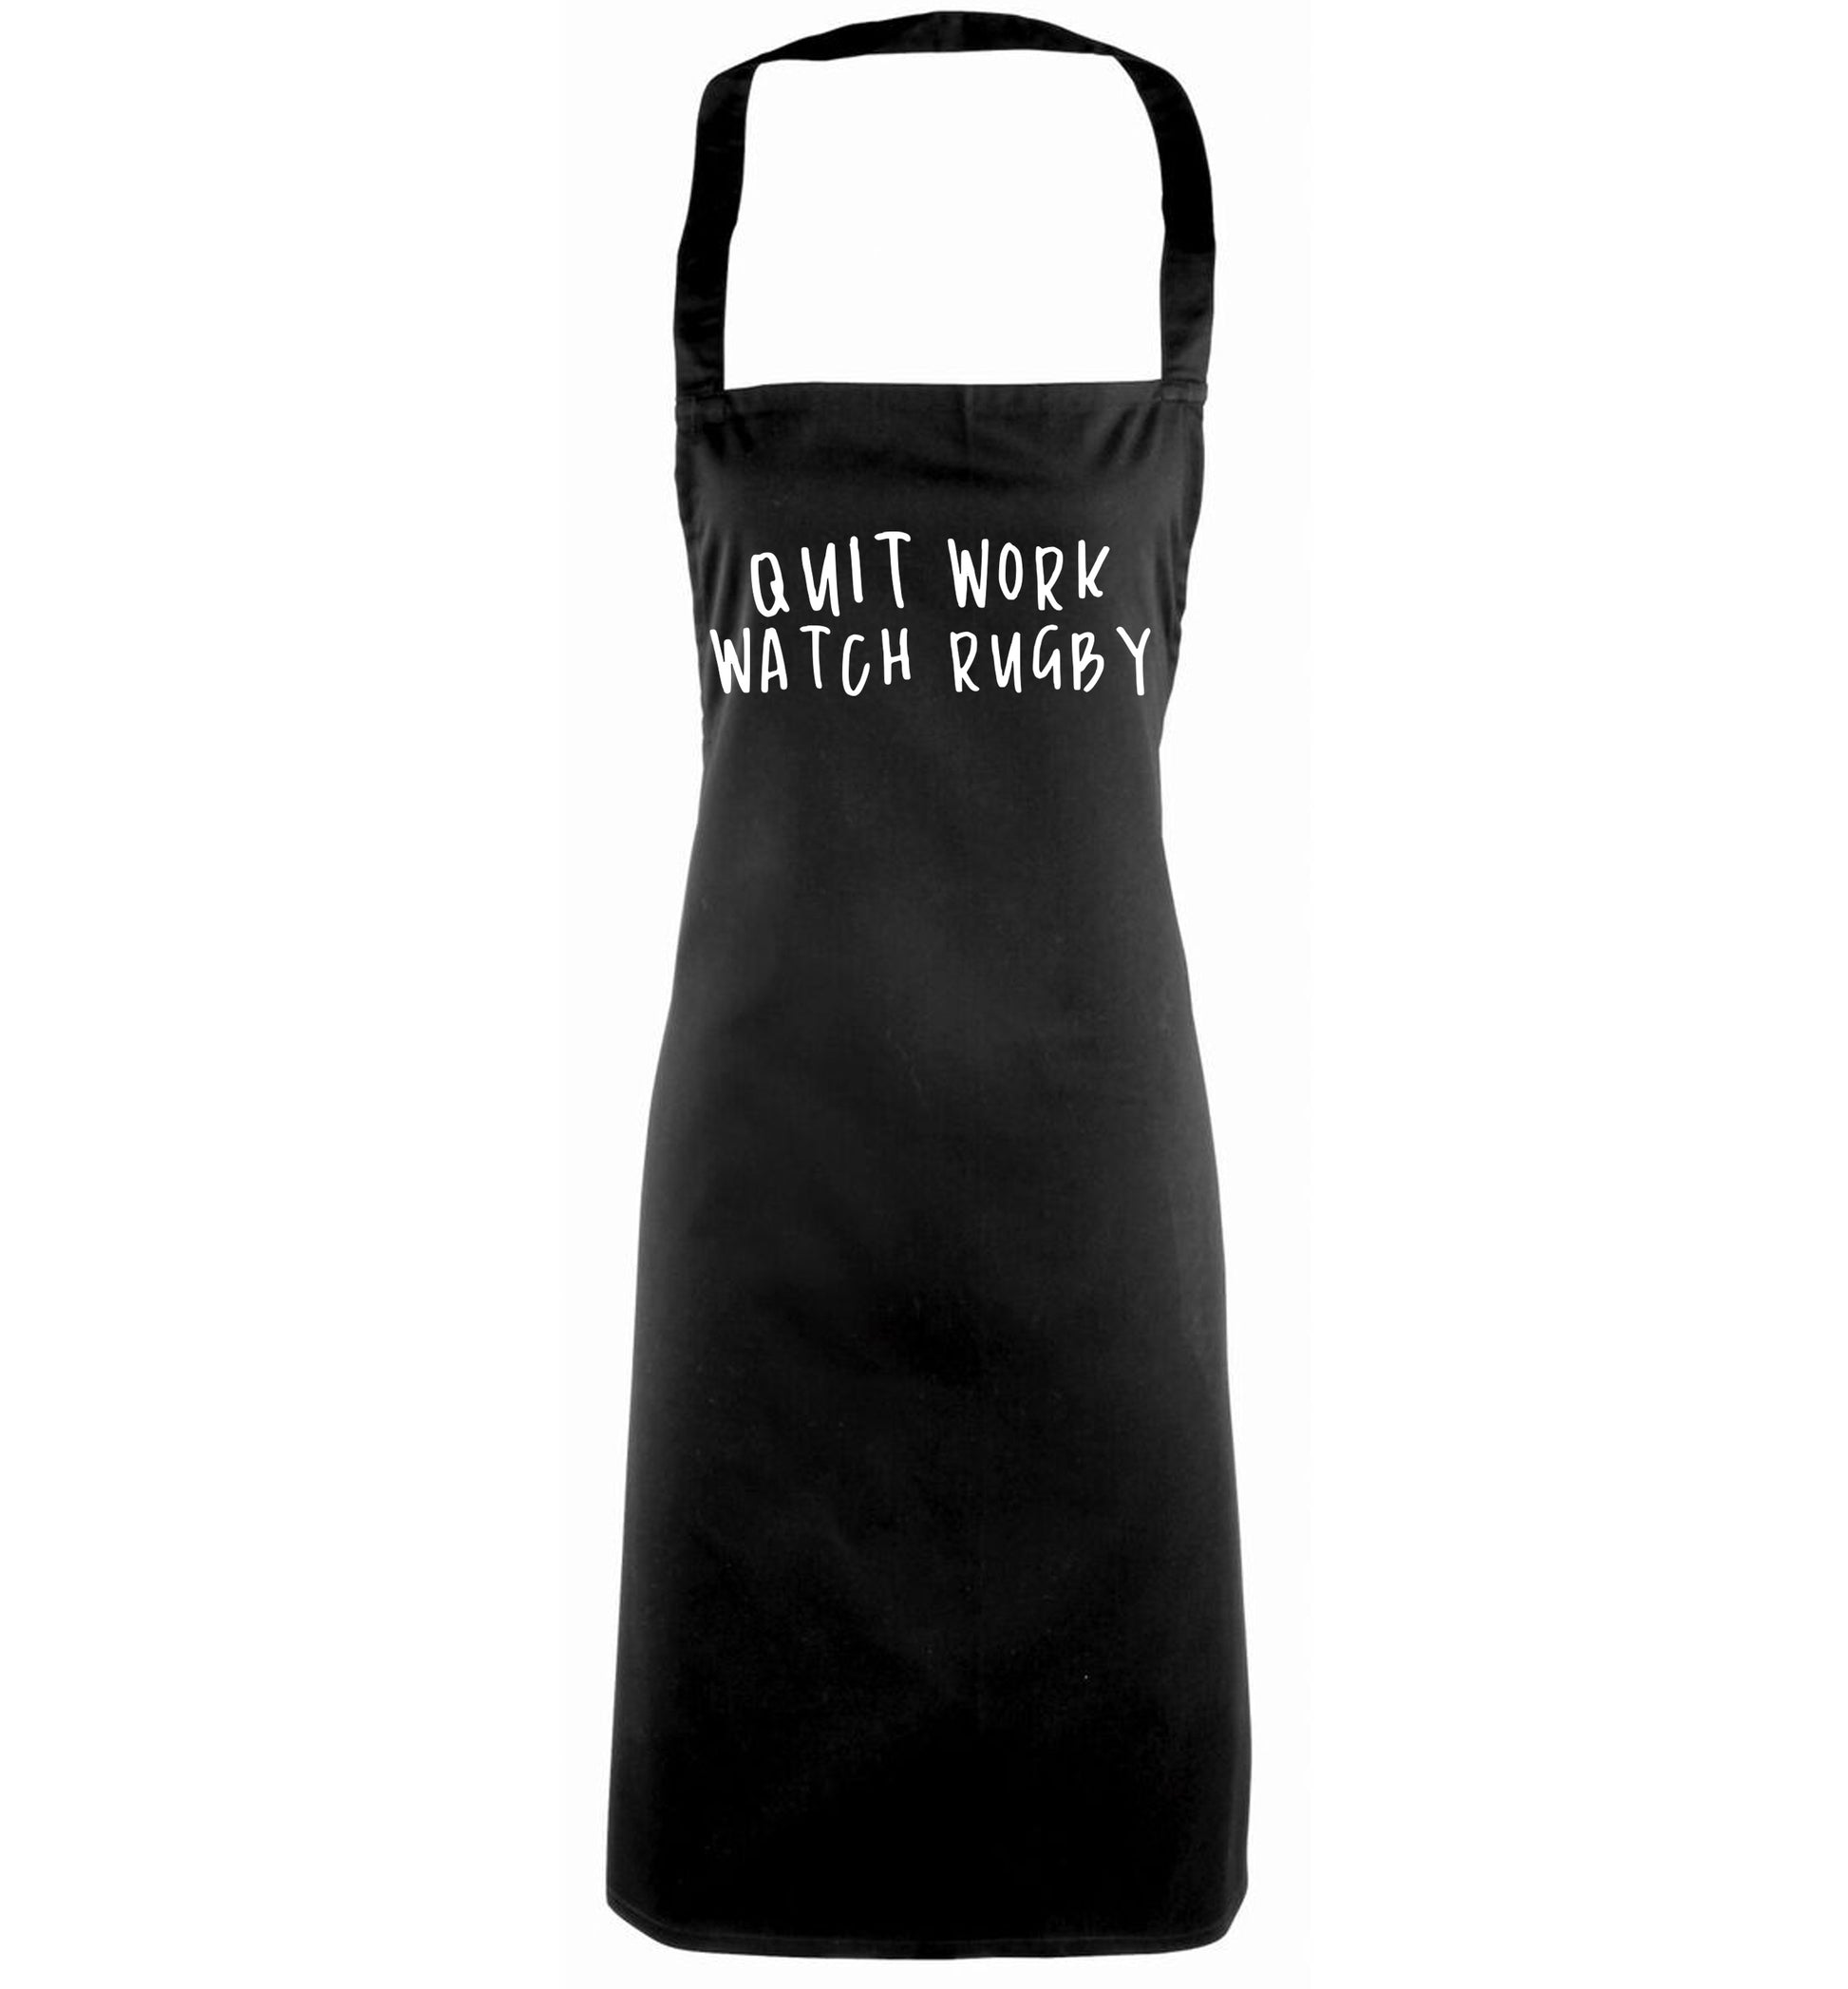 Quit work watch rugby black apron